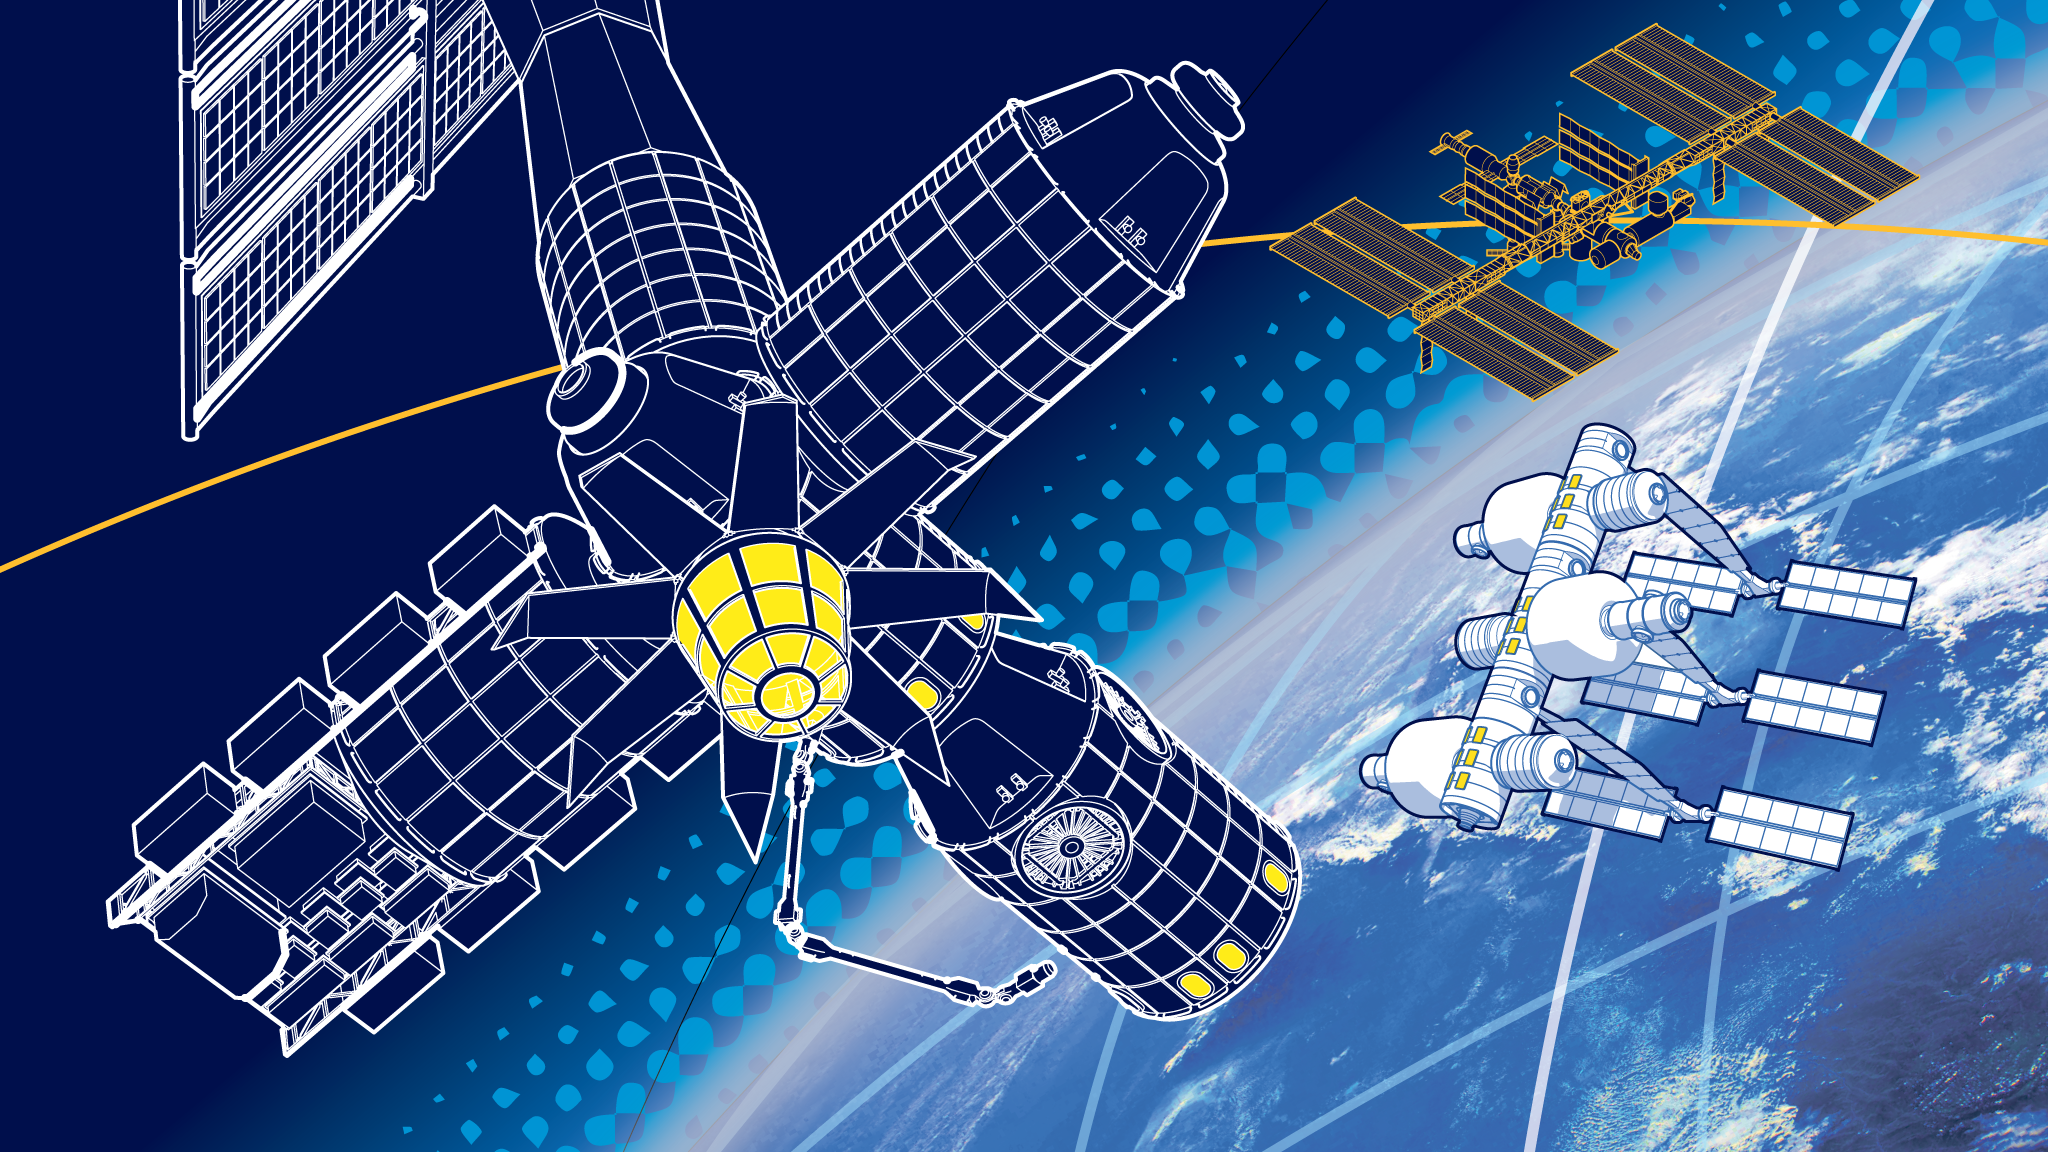 The race to reinvent the space station | Financial Times